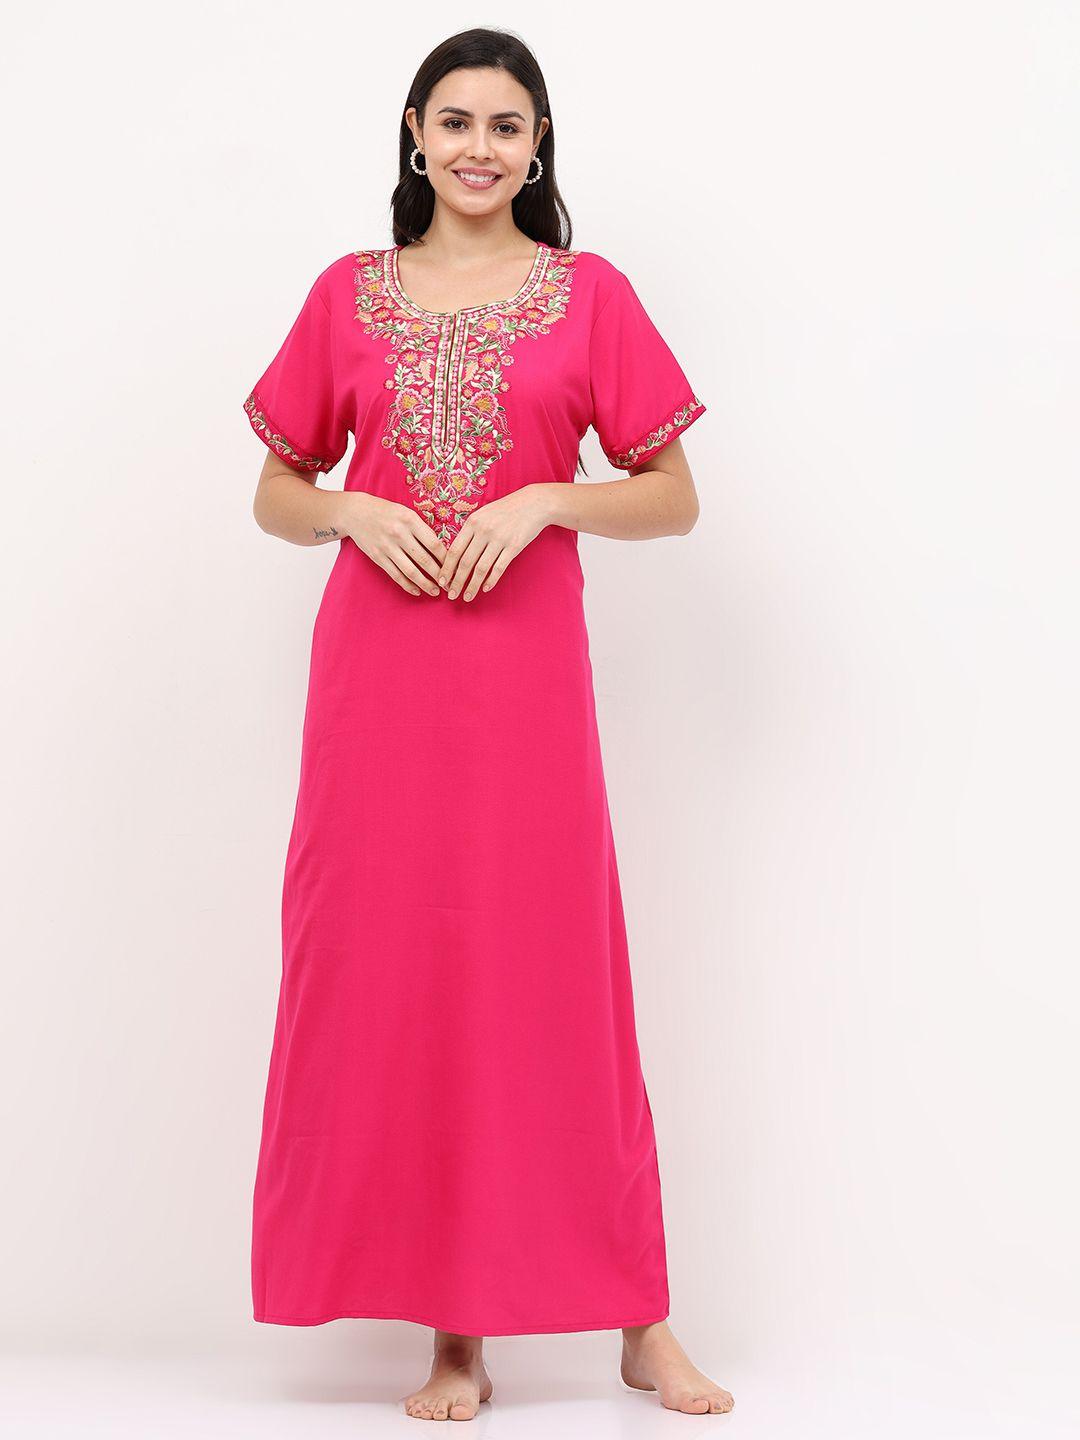 9shines label women pink embroidered maxi nightdress